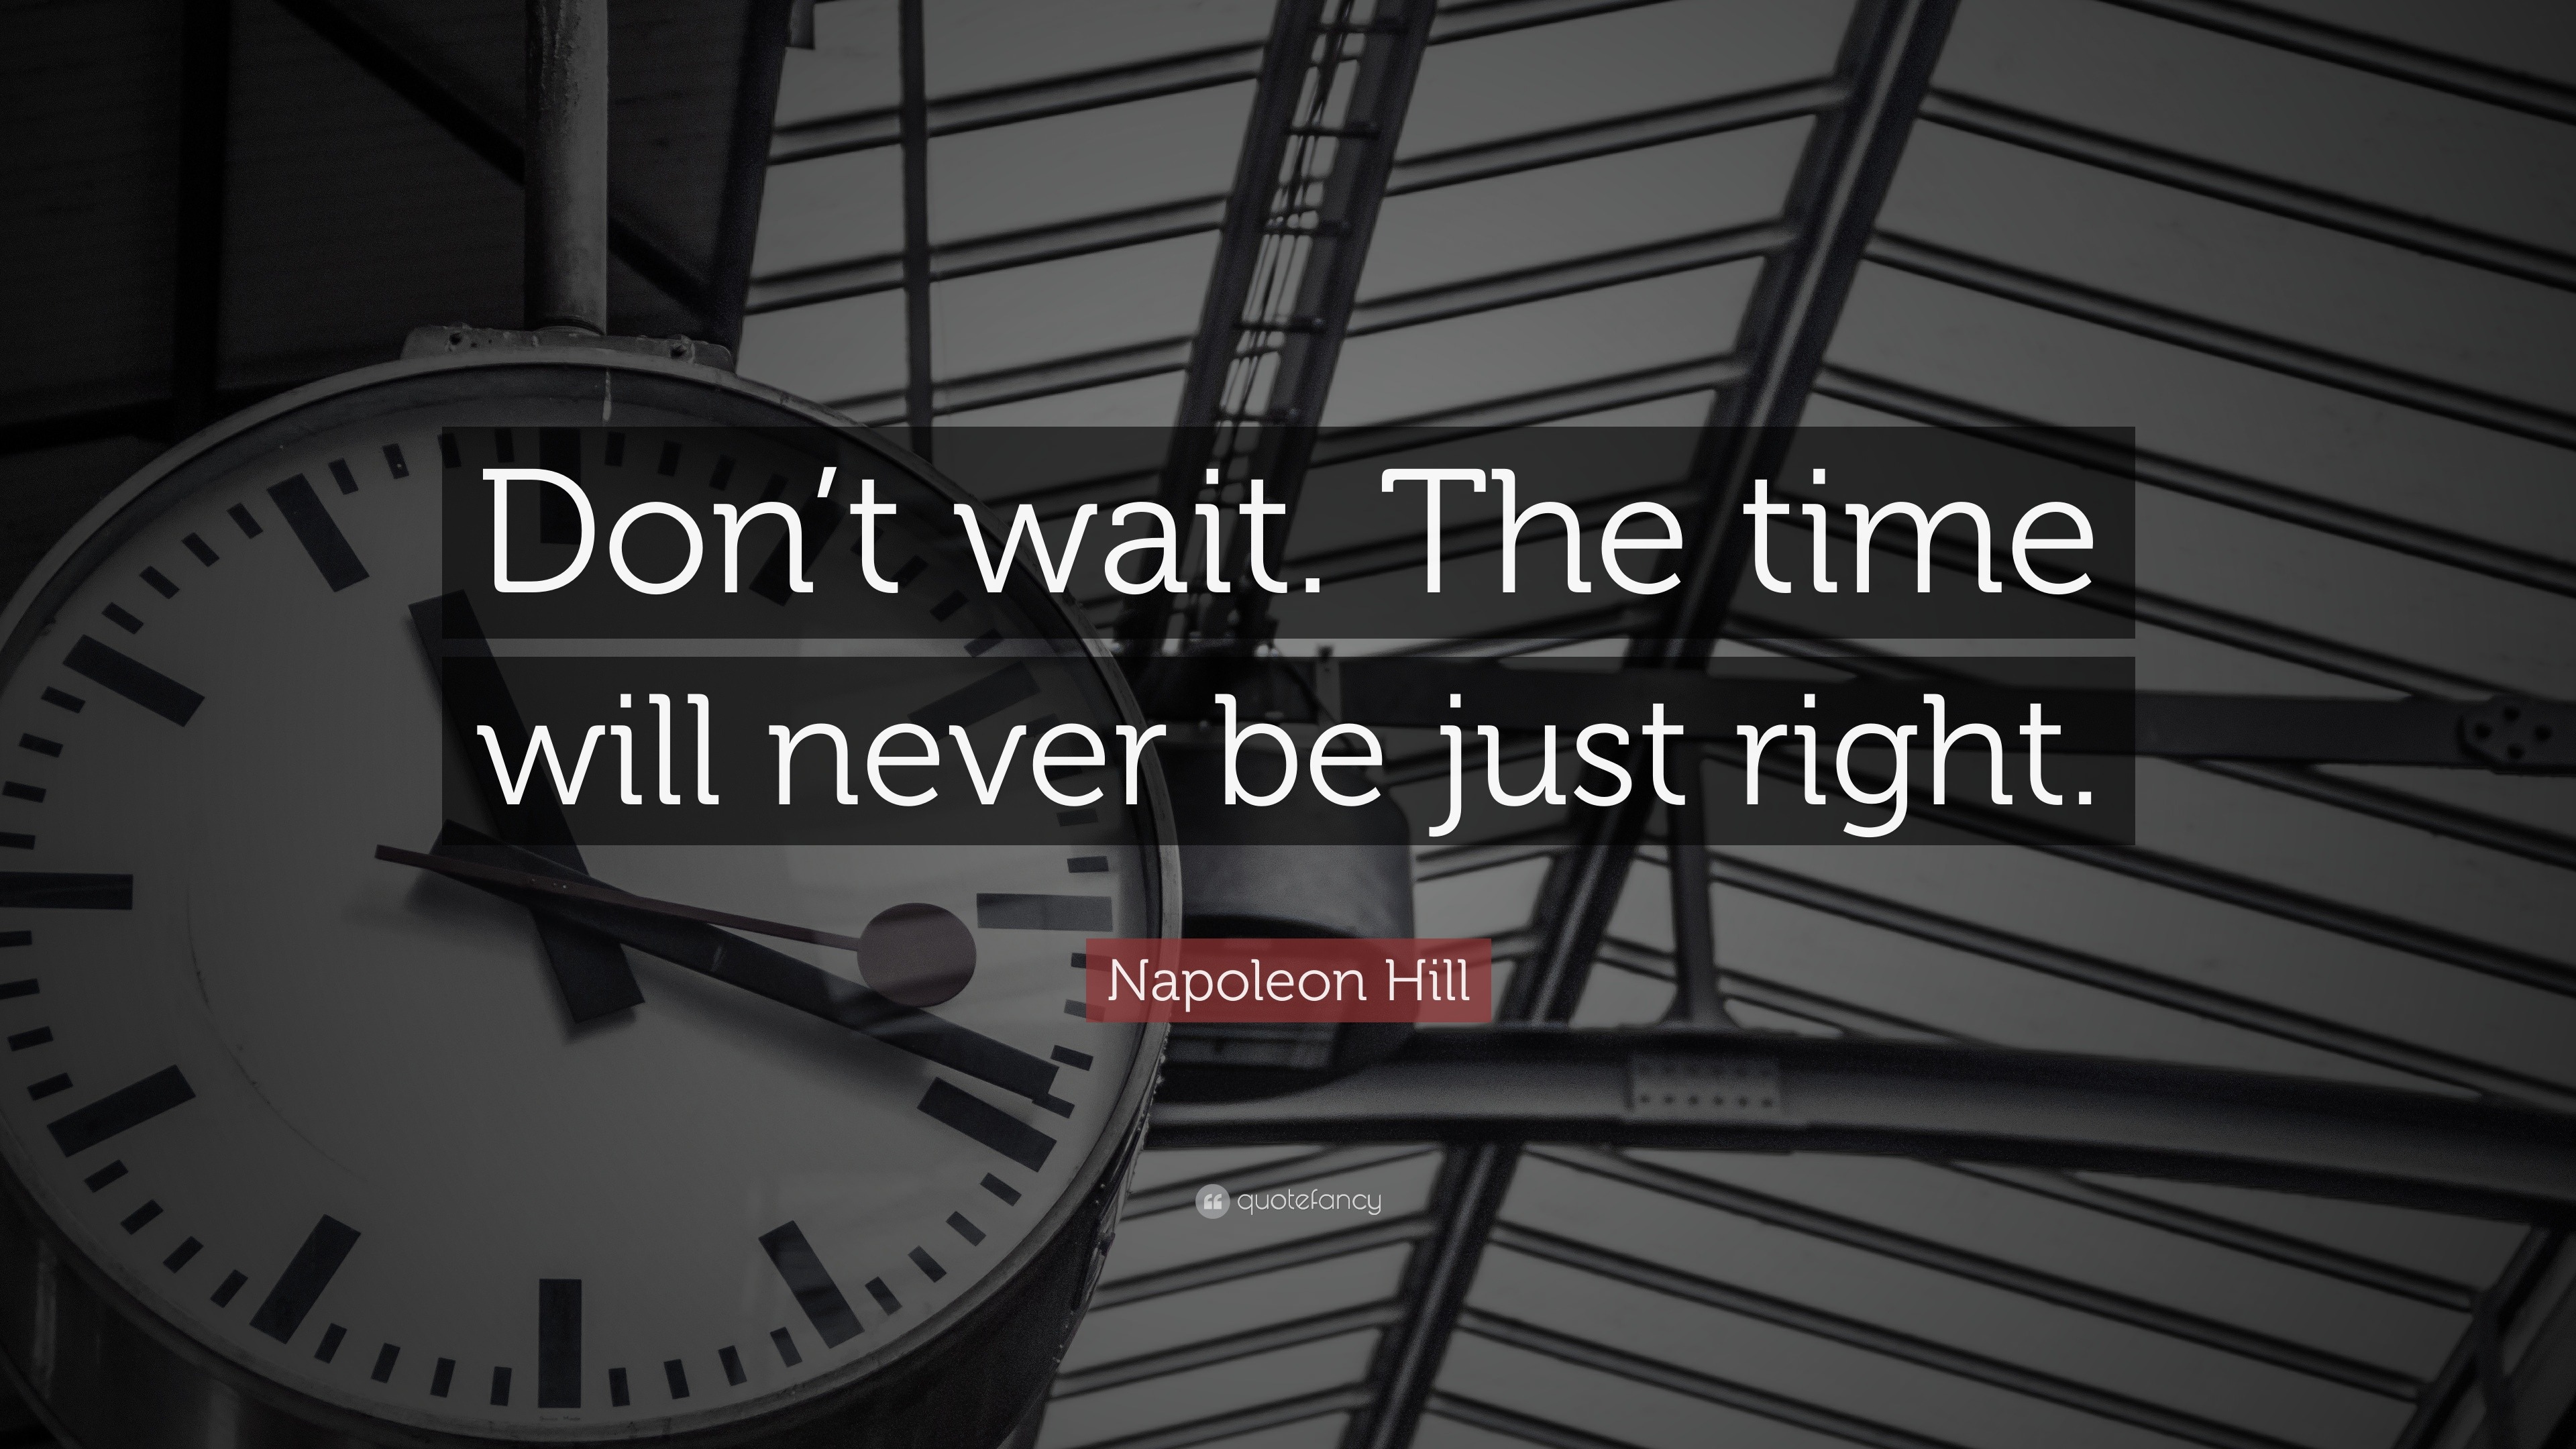 Napoleon Hill Quote “Don t wait The time will never be just